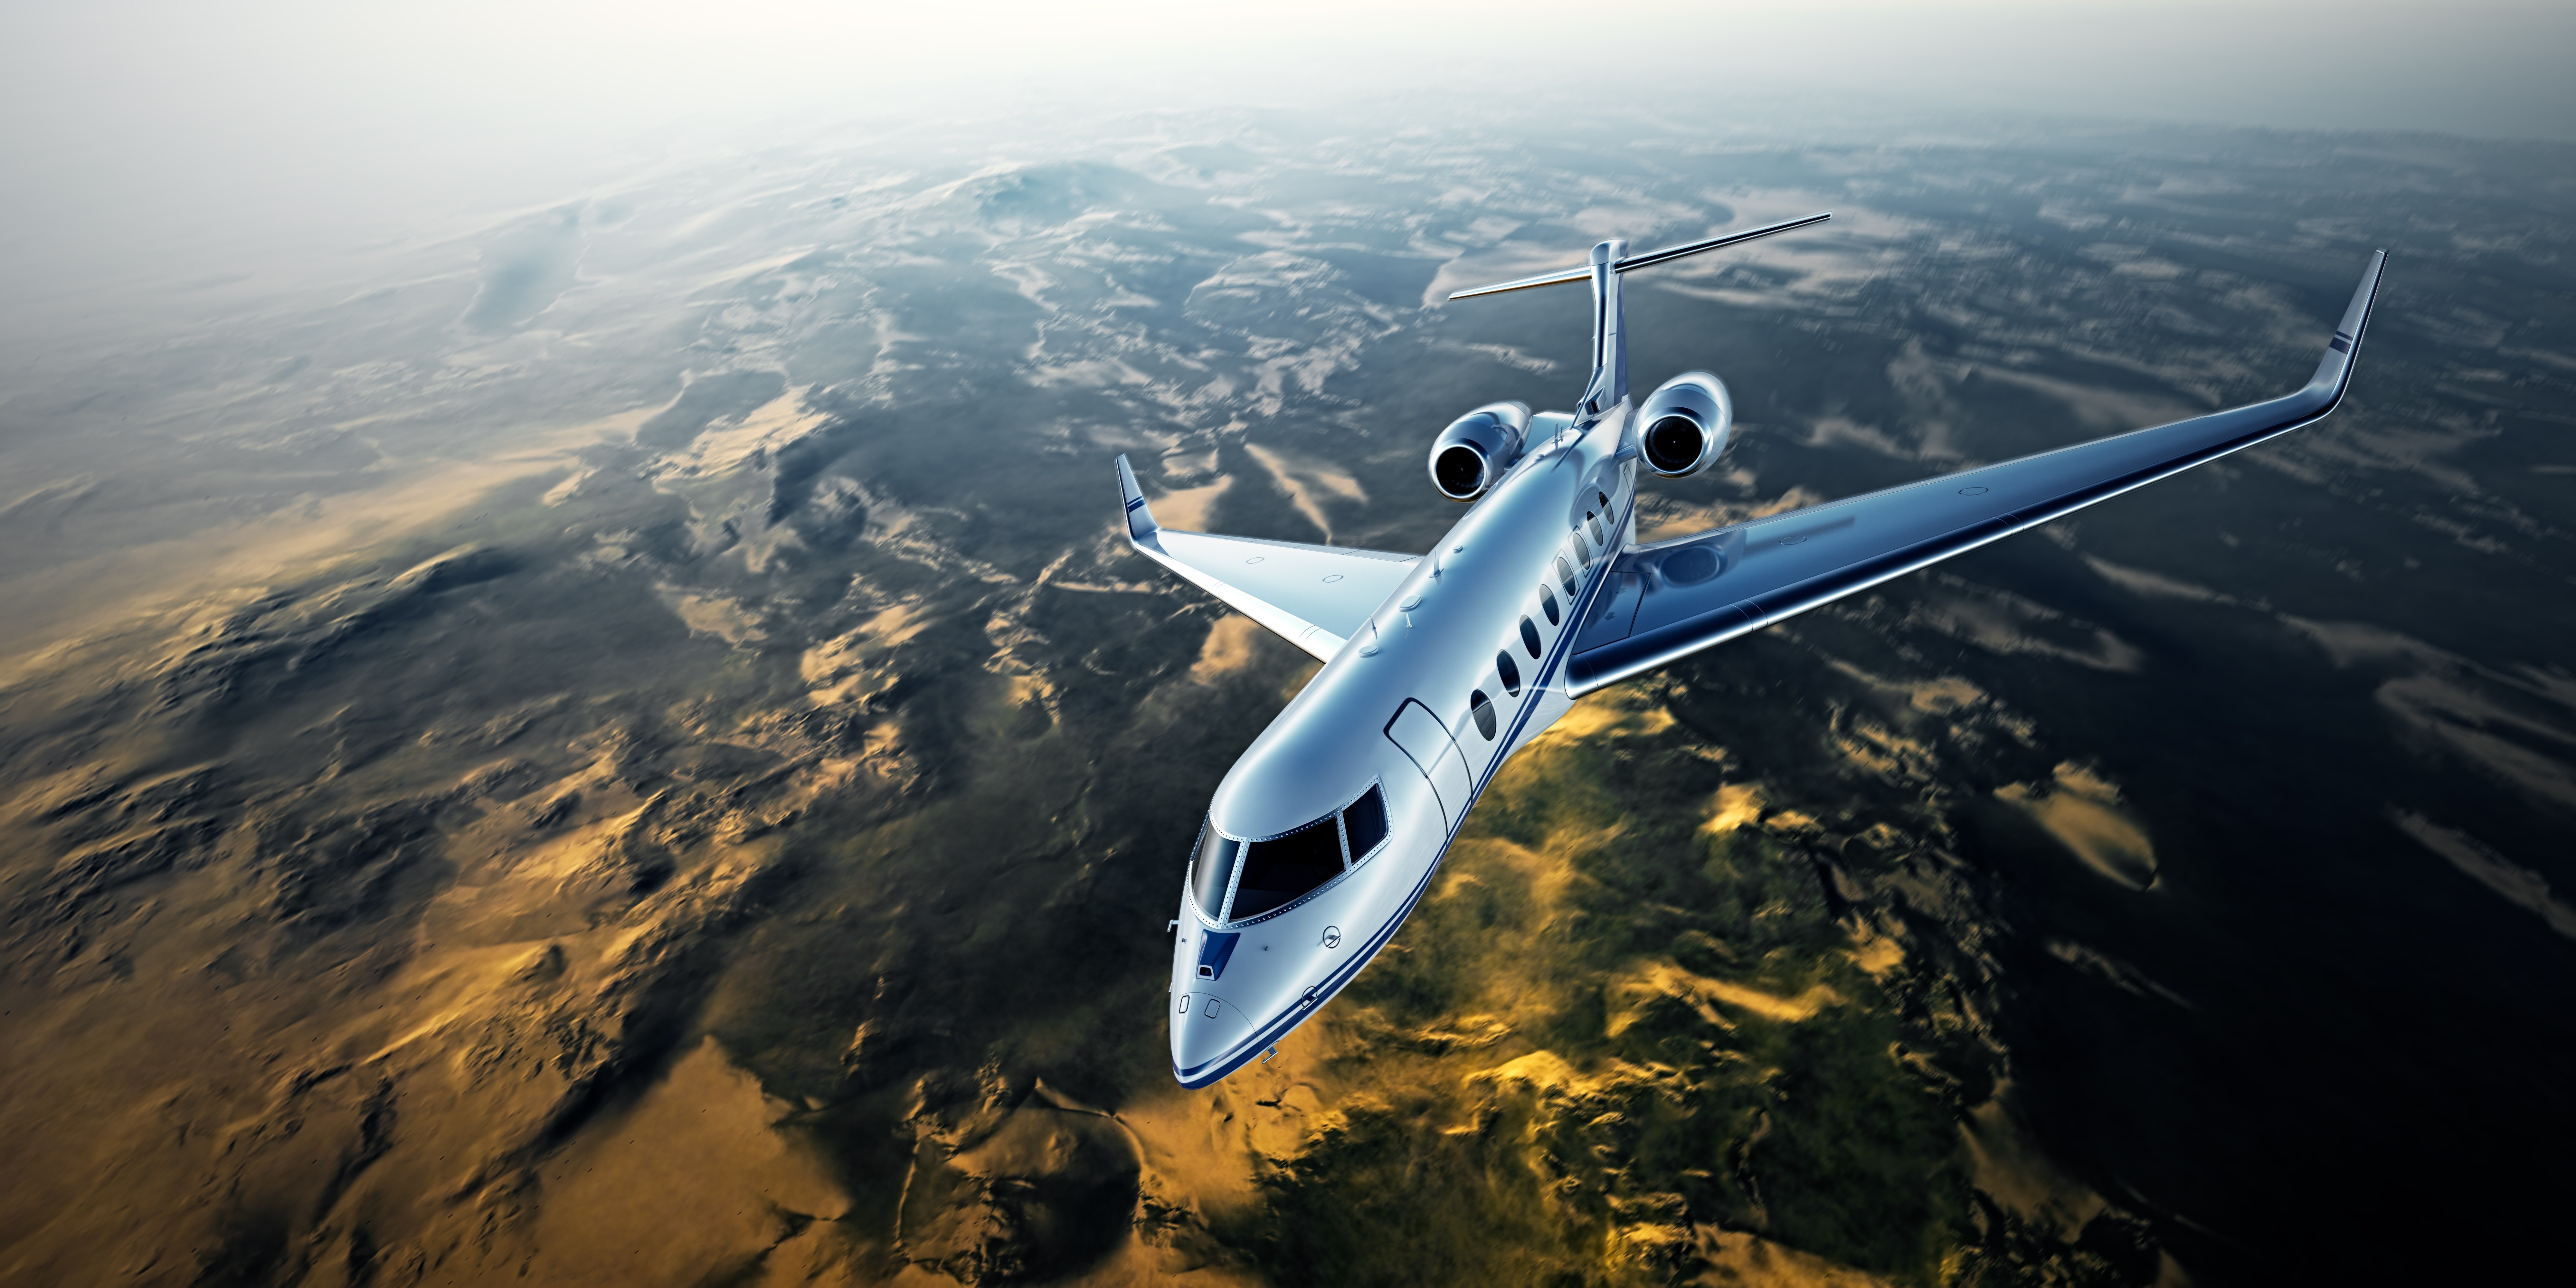 Monarch Air Group Can Provide the Most Efficient Private Jet for Your On-Demand Private Charter Flight